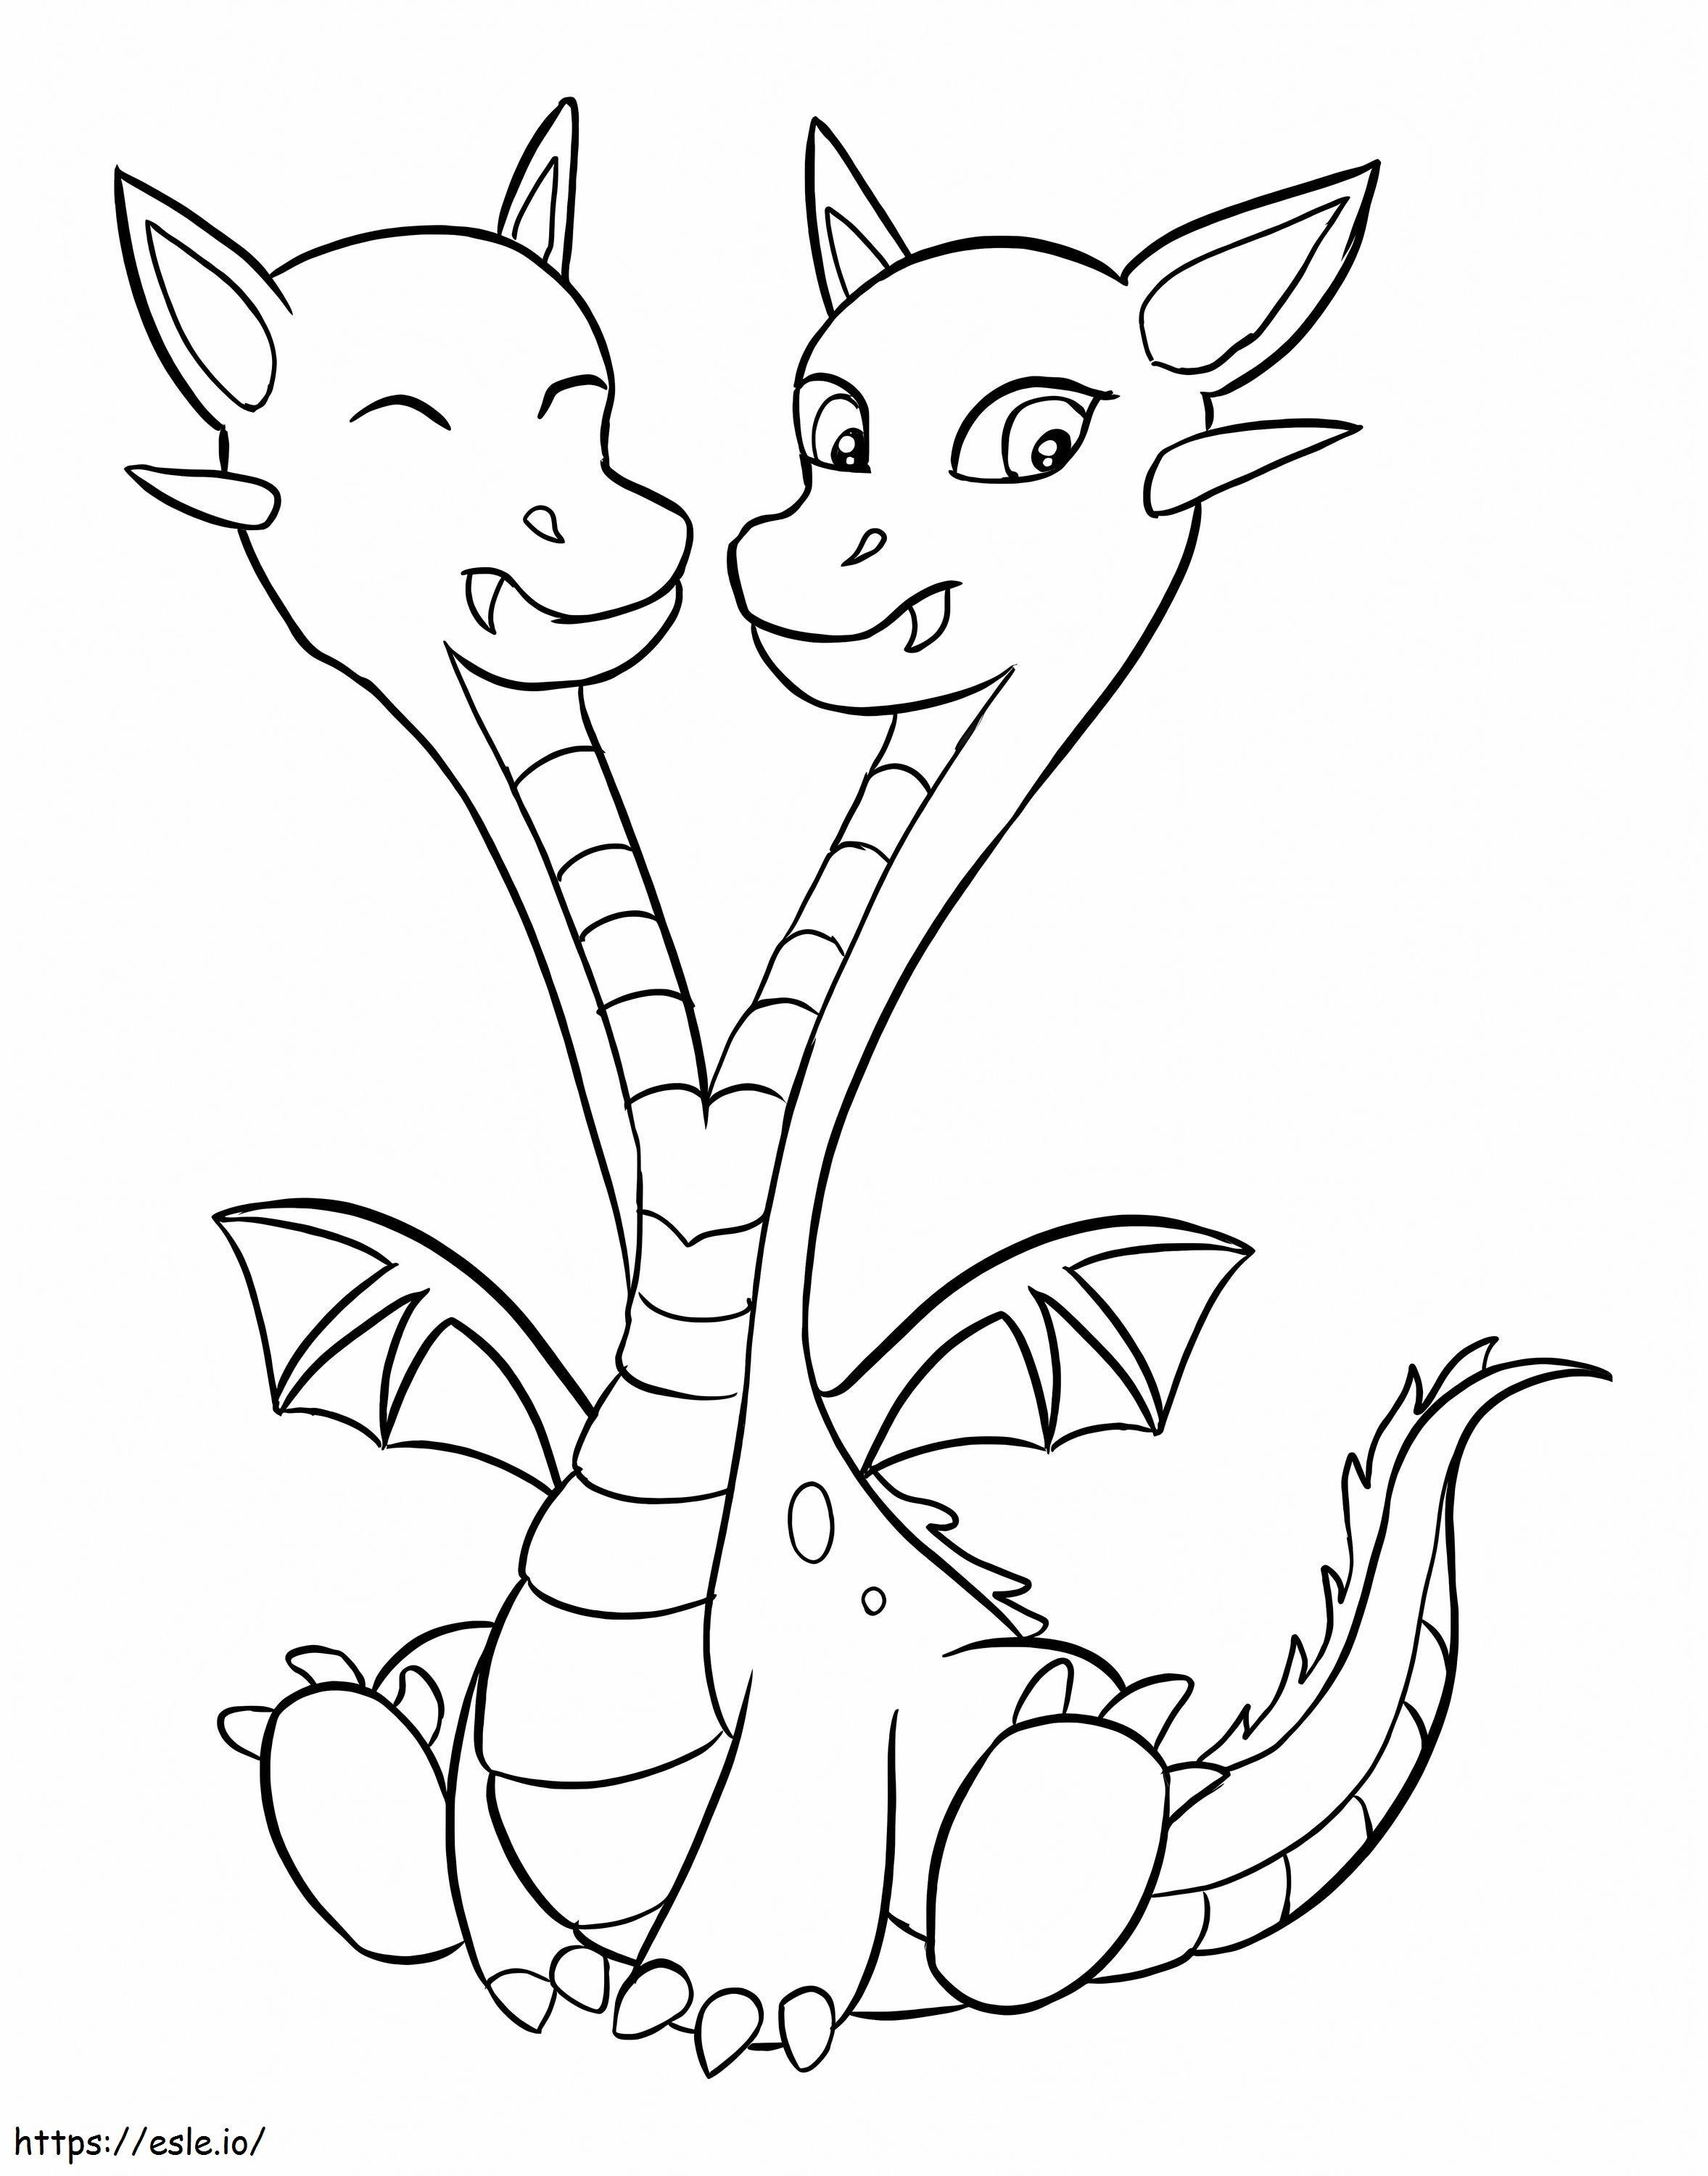 Two Headed Dragon coloring page